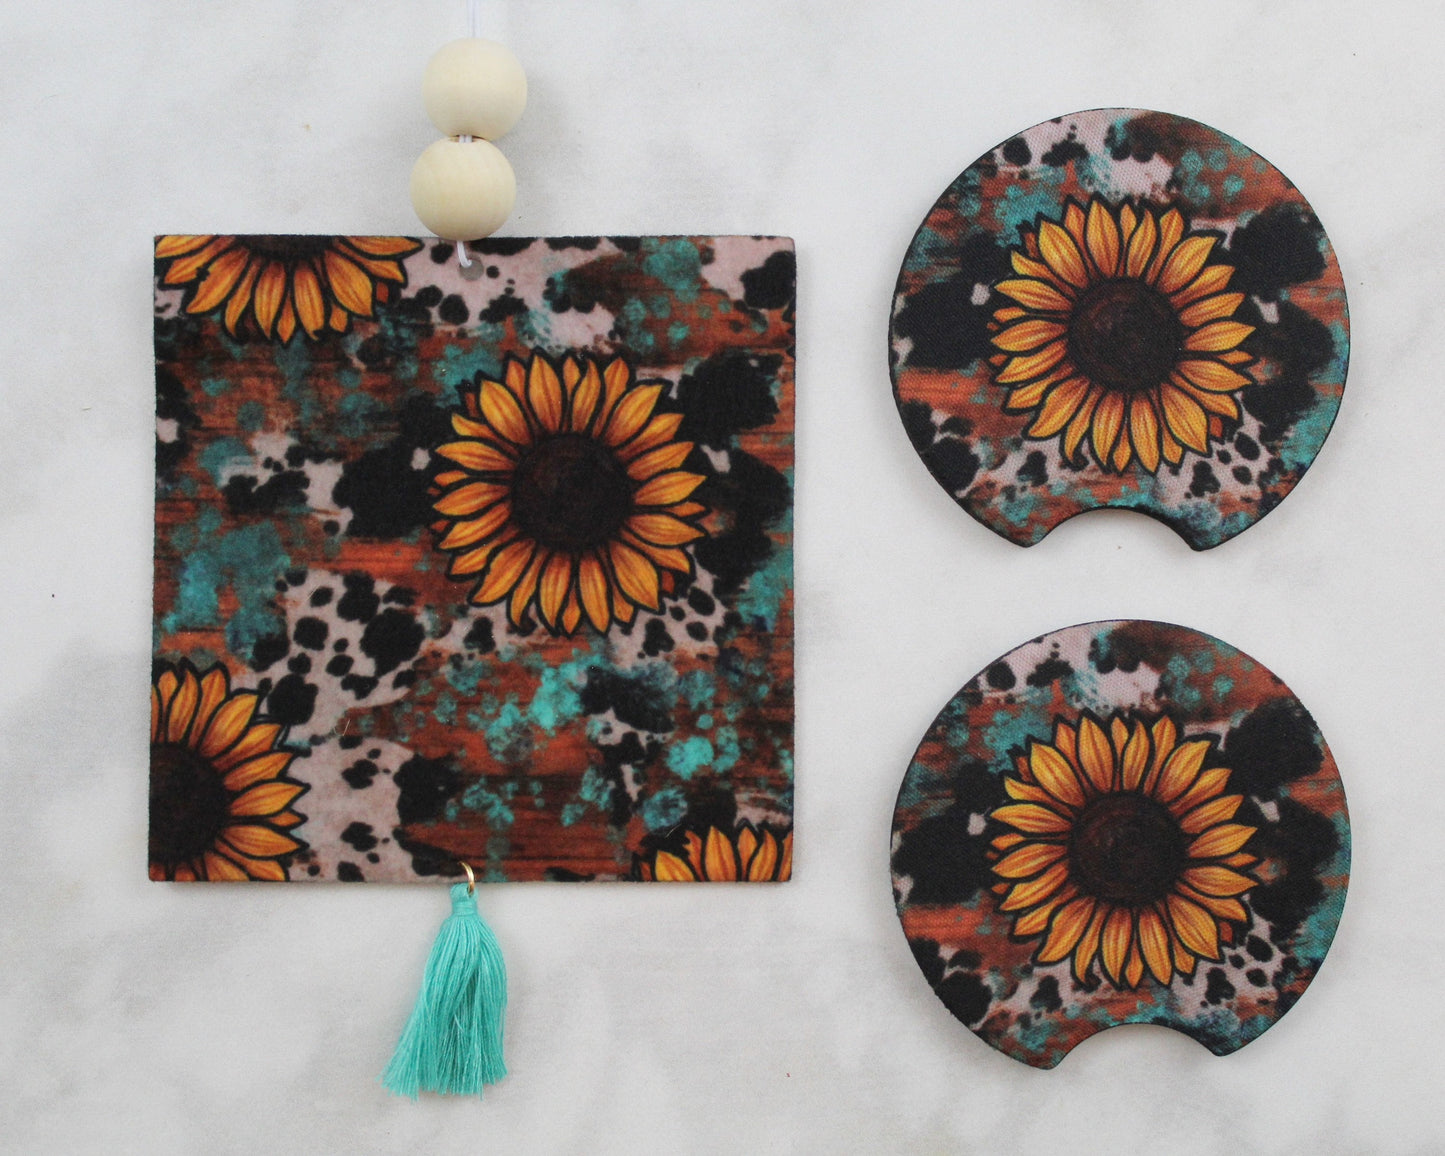 Sunflowers Teal and Cow Print Coaster and Air Freshener Gift Set